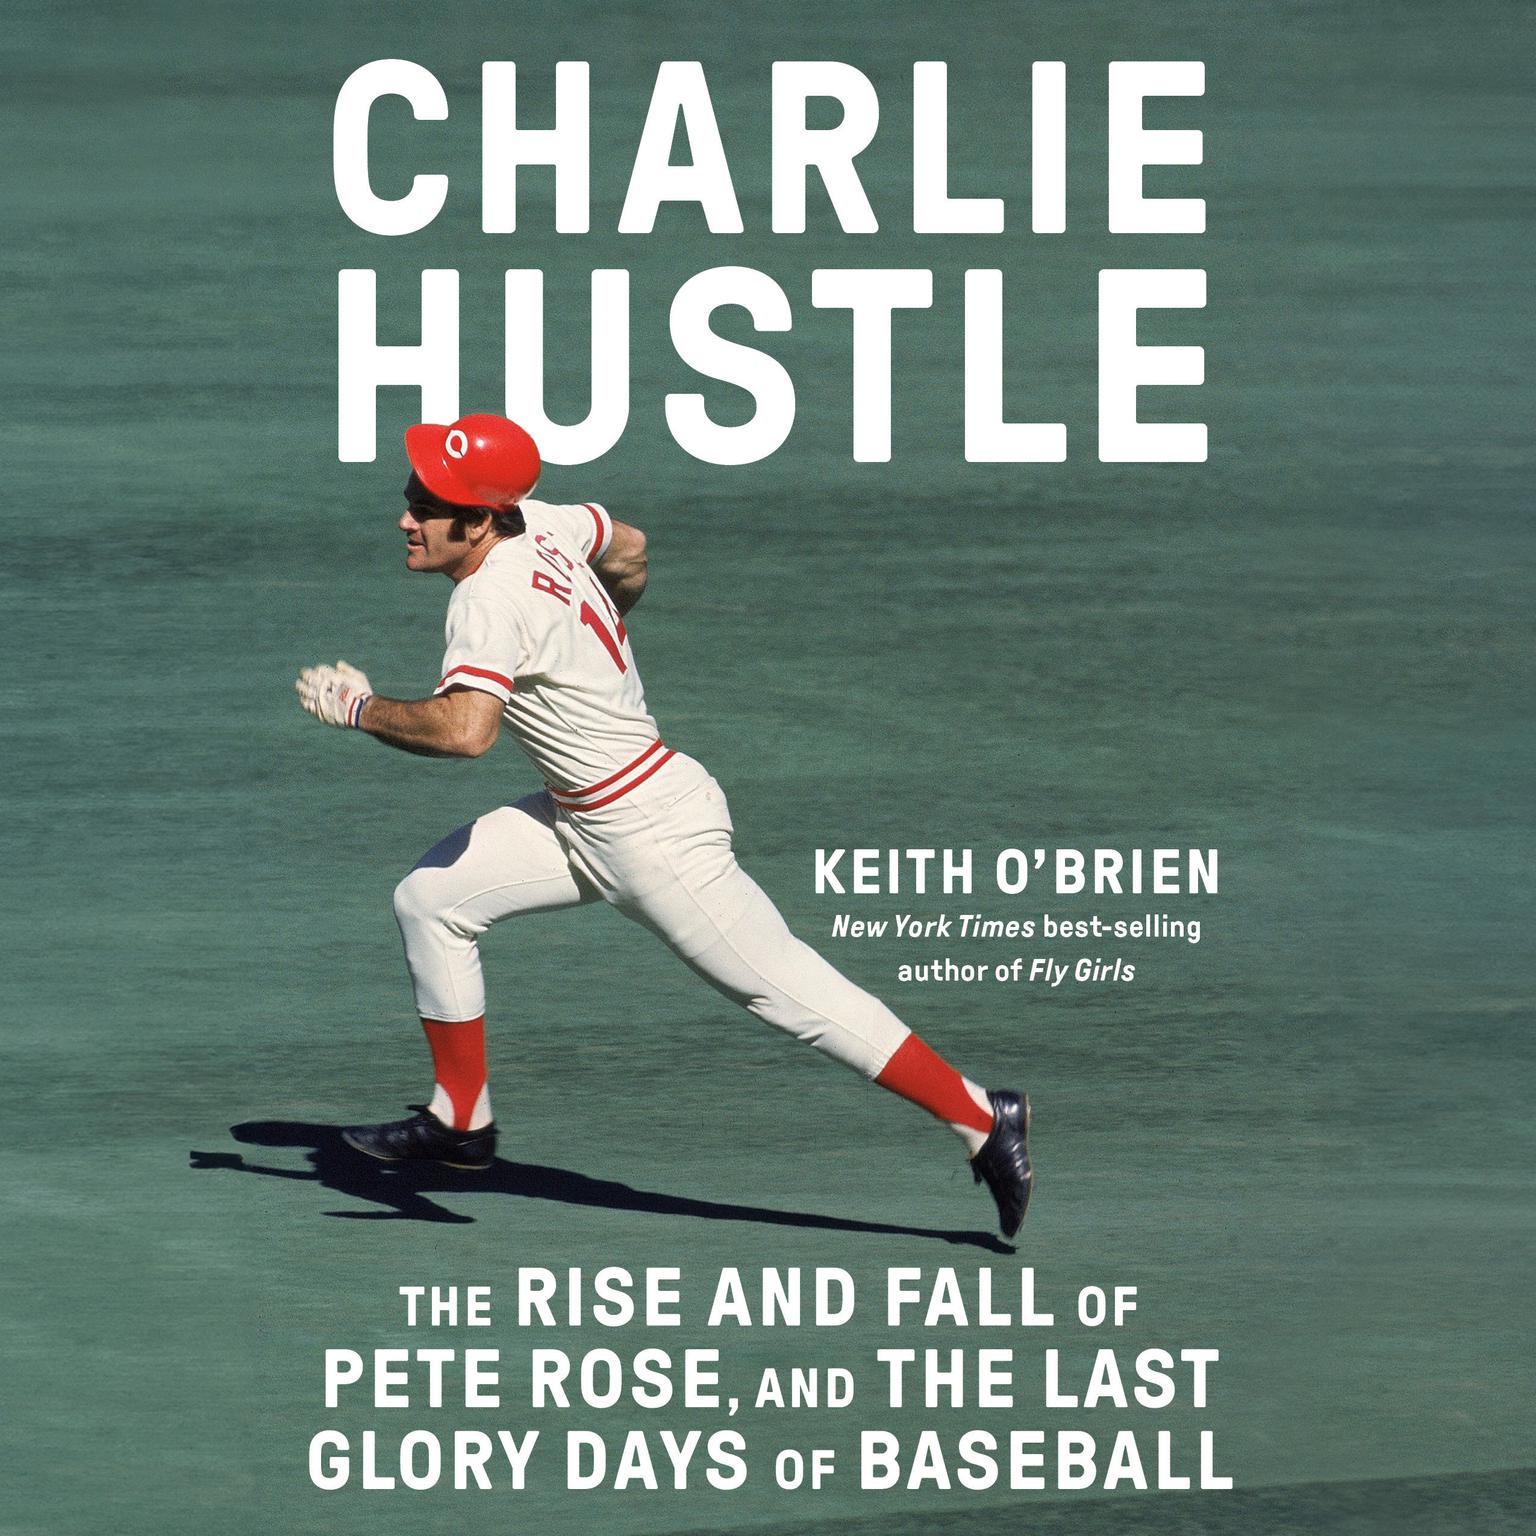 Charlie Hustle: The Rise and Fall of Pete Rose, and the Last Glory Days of Baseball Audiobook, by Keith O'Brien